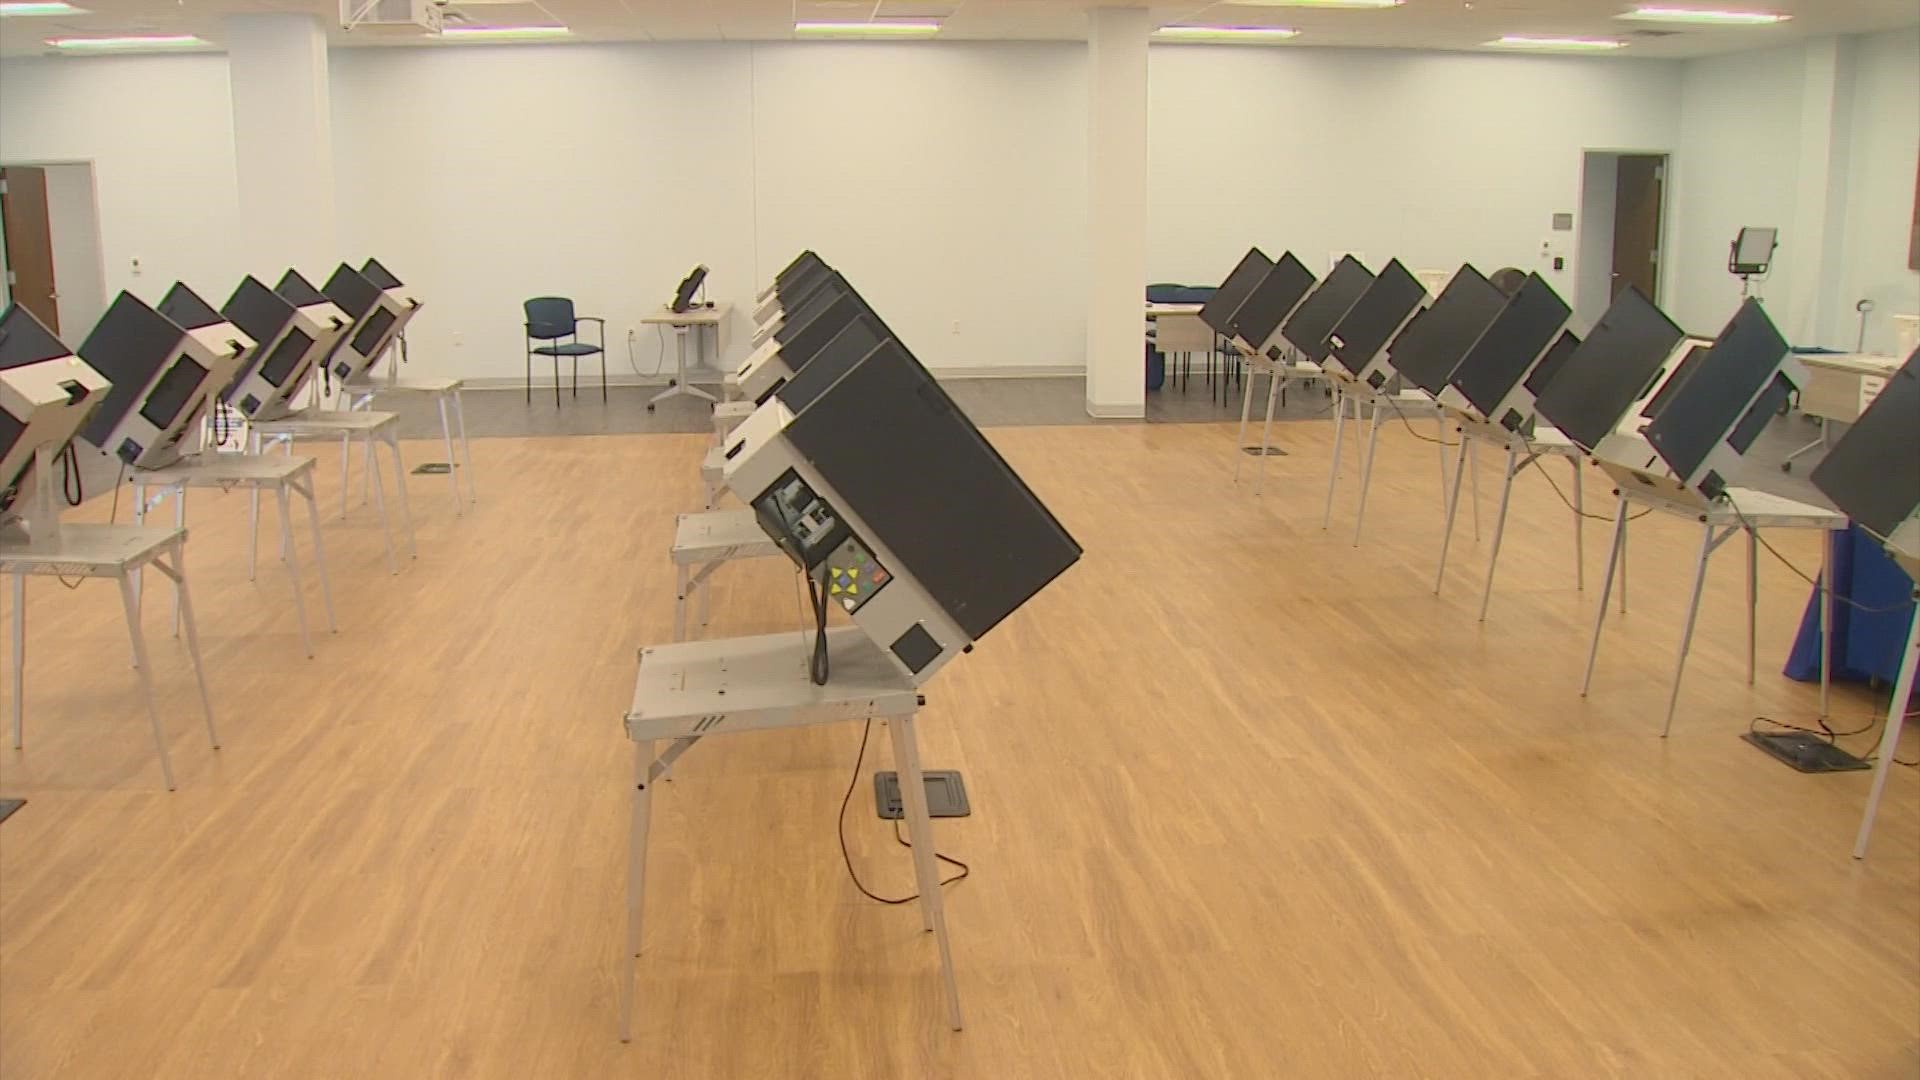 This Friday, the public was invited to test Tarrant County's voting machines ahead of the Nov. 8 midterm election.